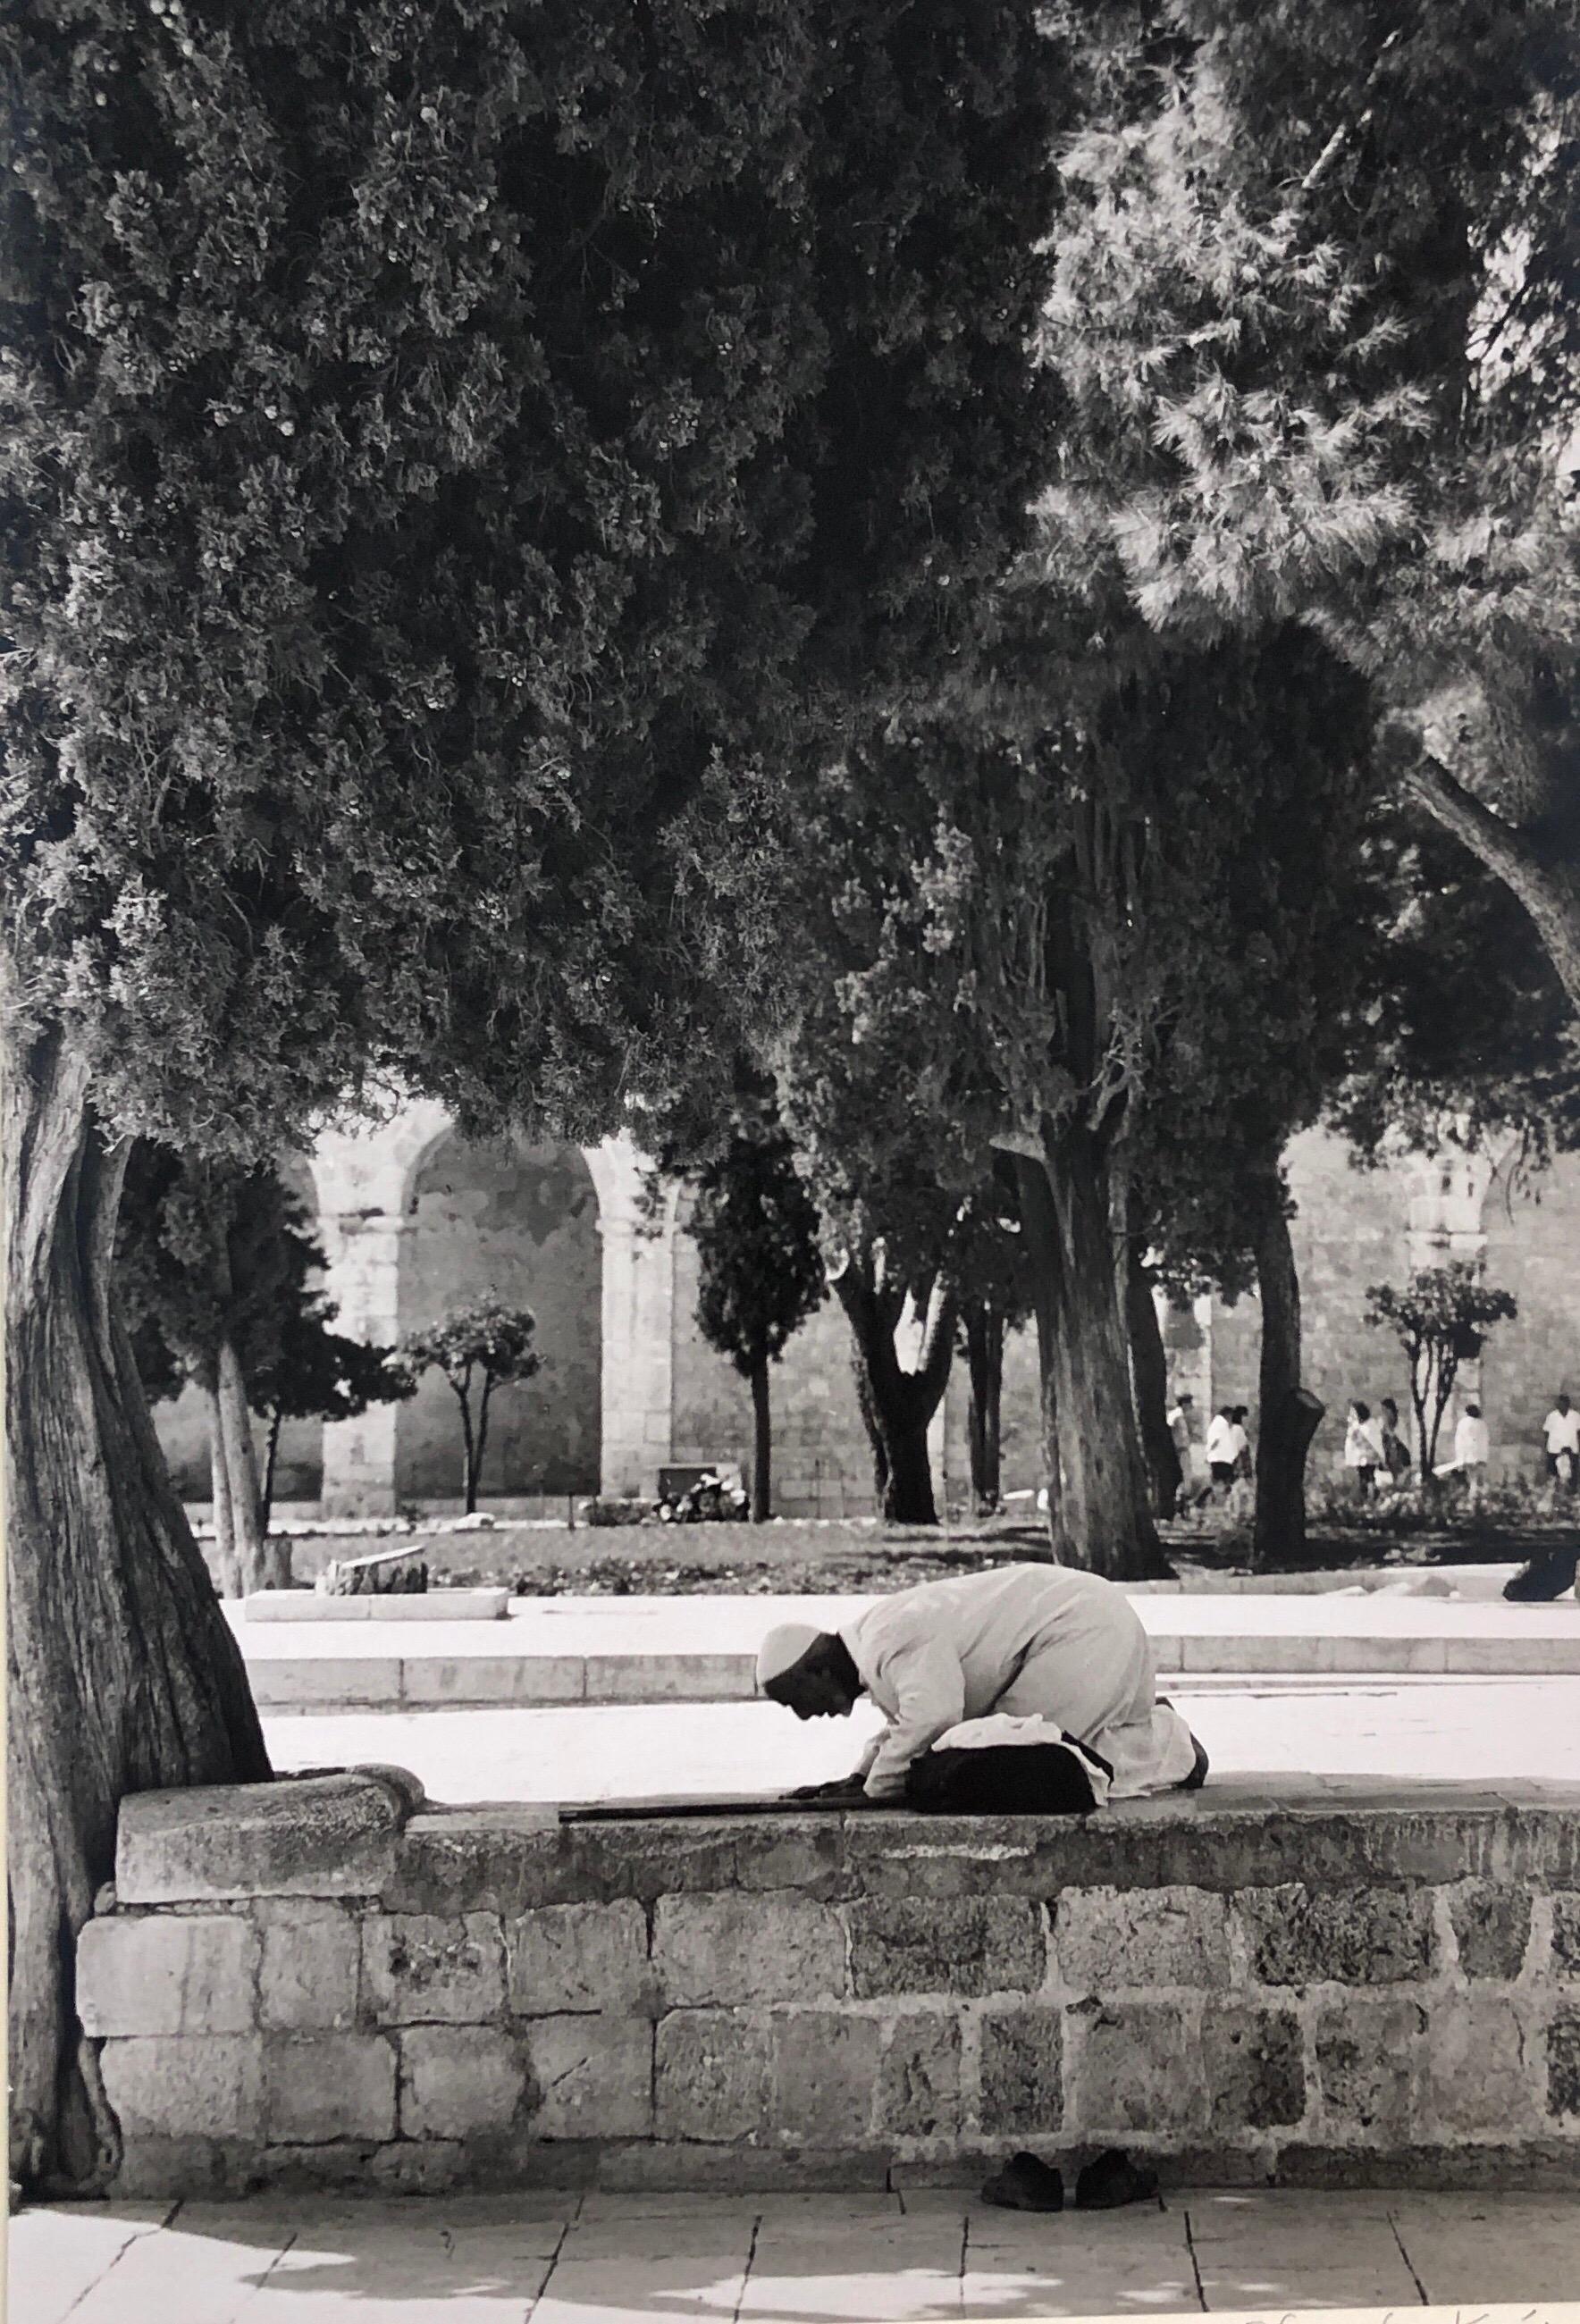 This depicts an Arab, Muslim Man bowing in prayer on the Temple Mount, 